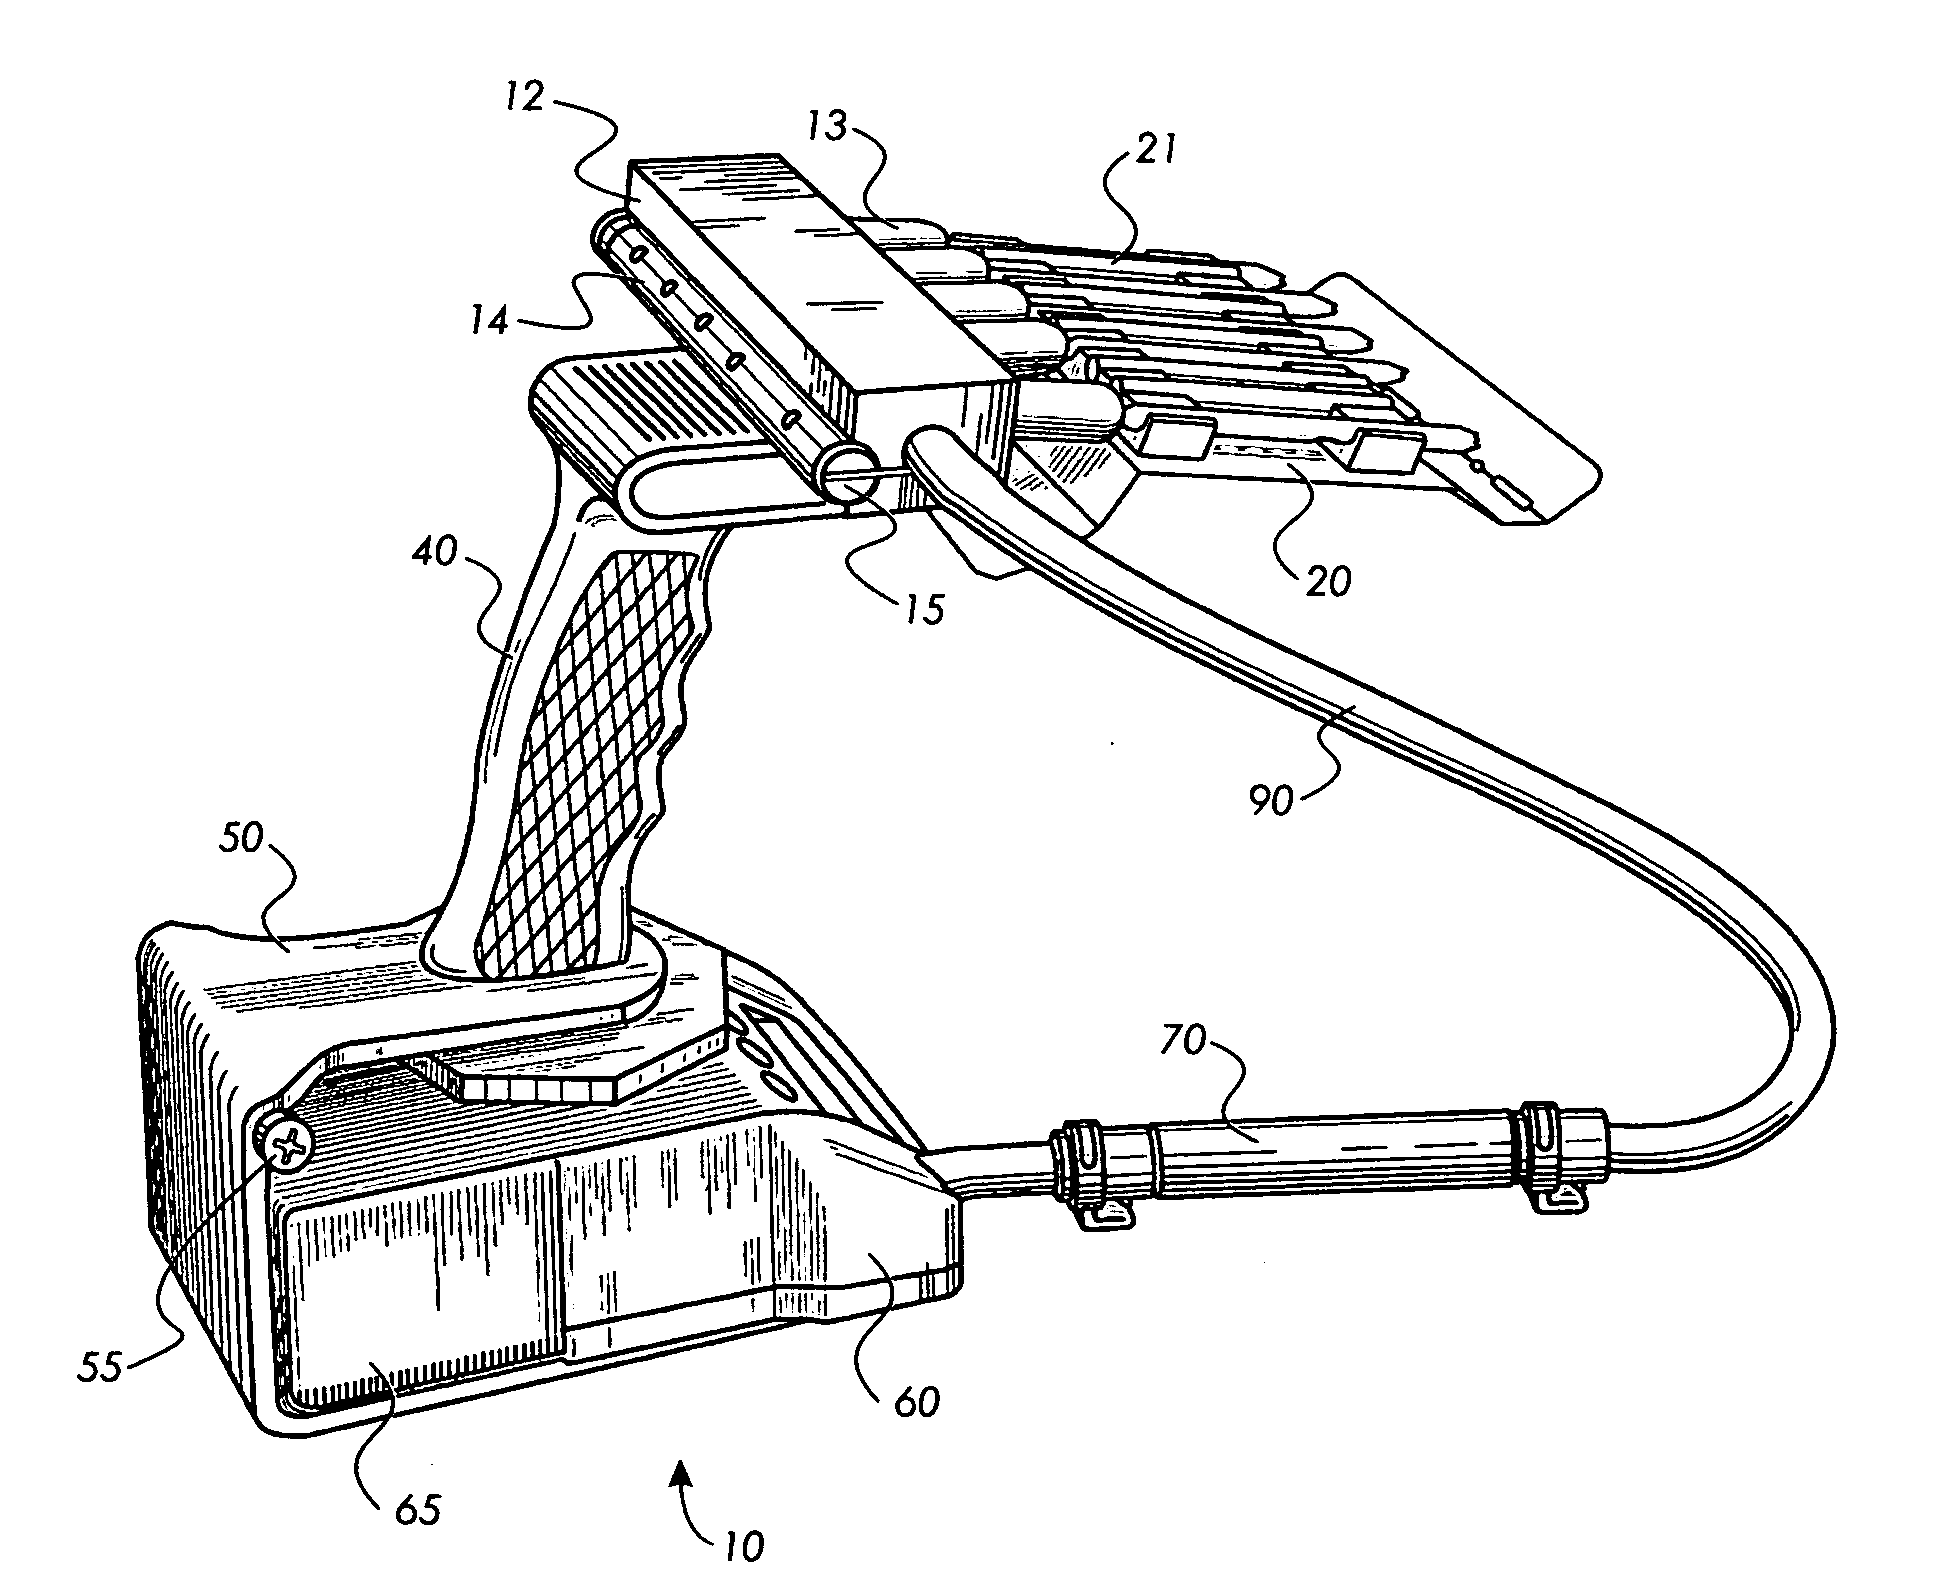 Air sampling system and method for calibration